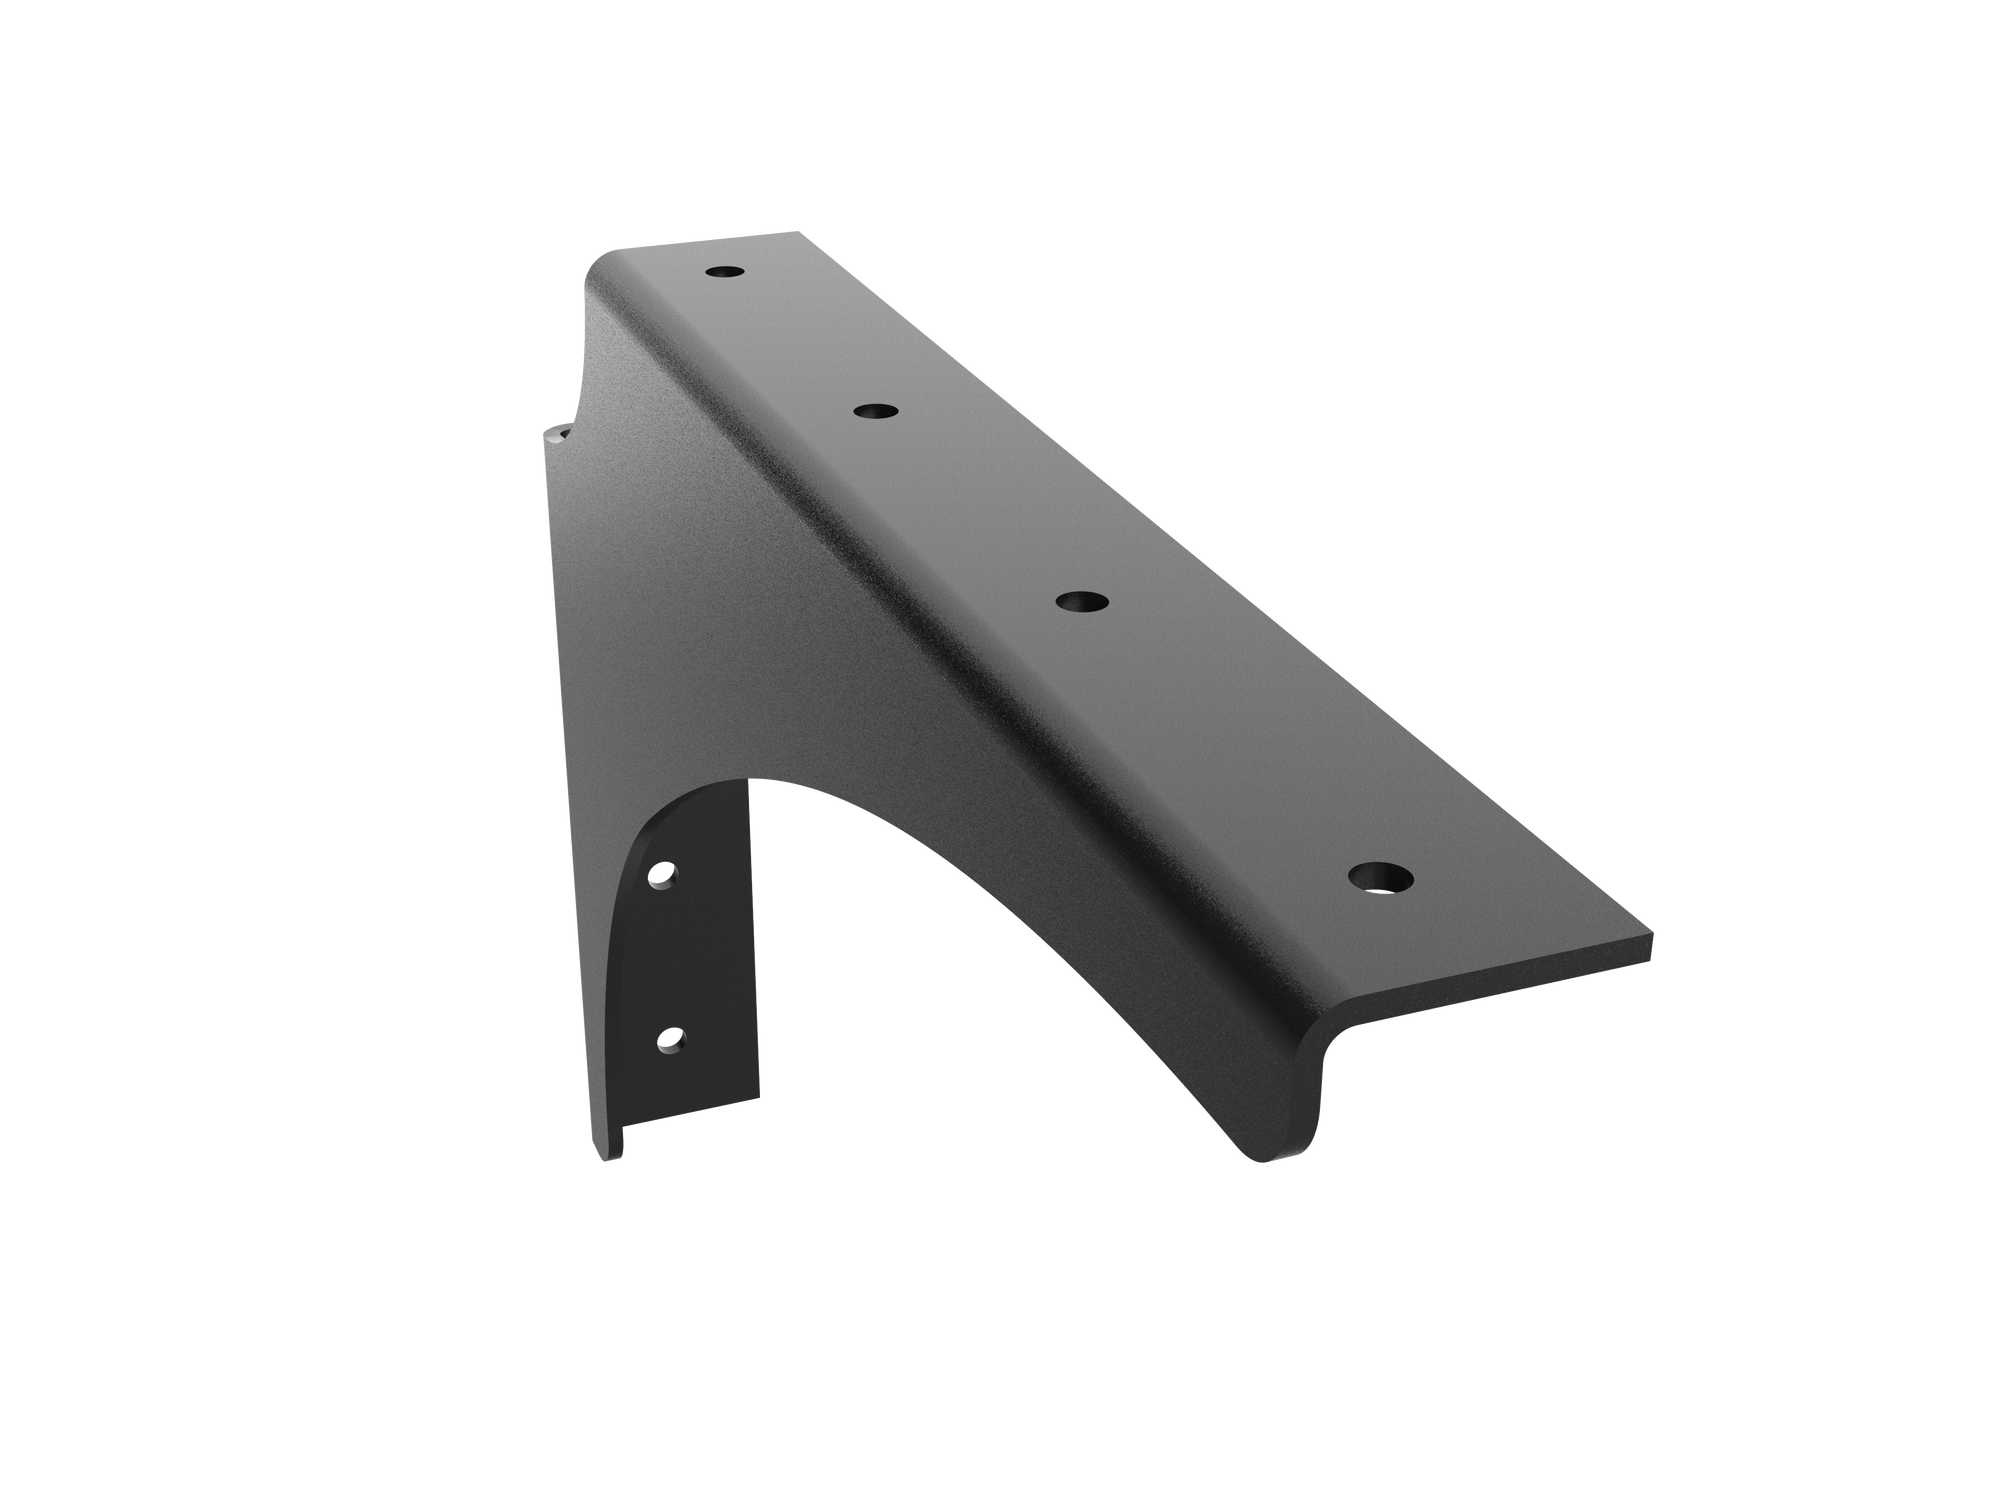 Universal Commercial Support Bracket measuring 12" x 8" with Black Powder Coat Finish. Used to support floating ADA compliant vanities, desks, work stations, shelving systems, countertops and and more. 